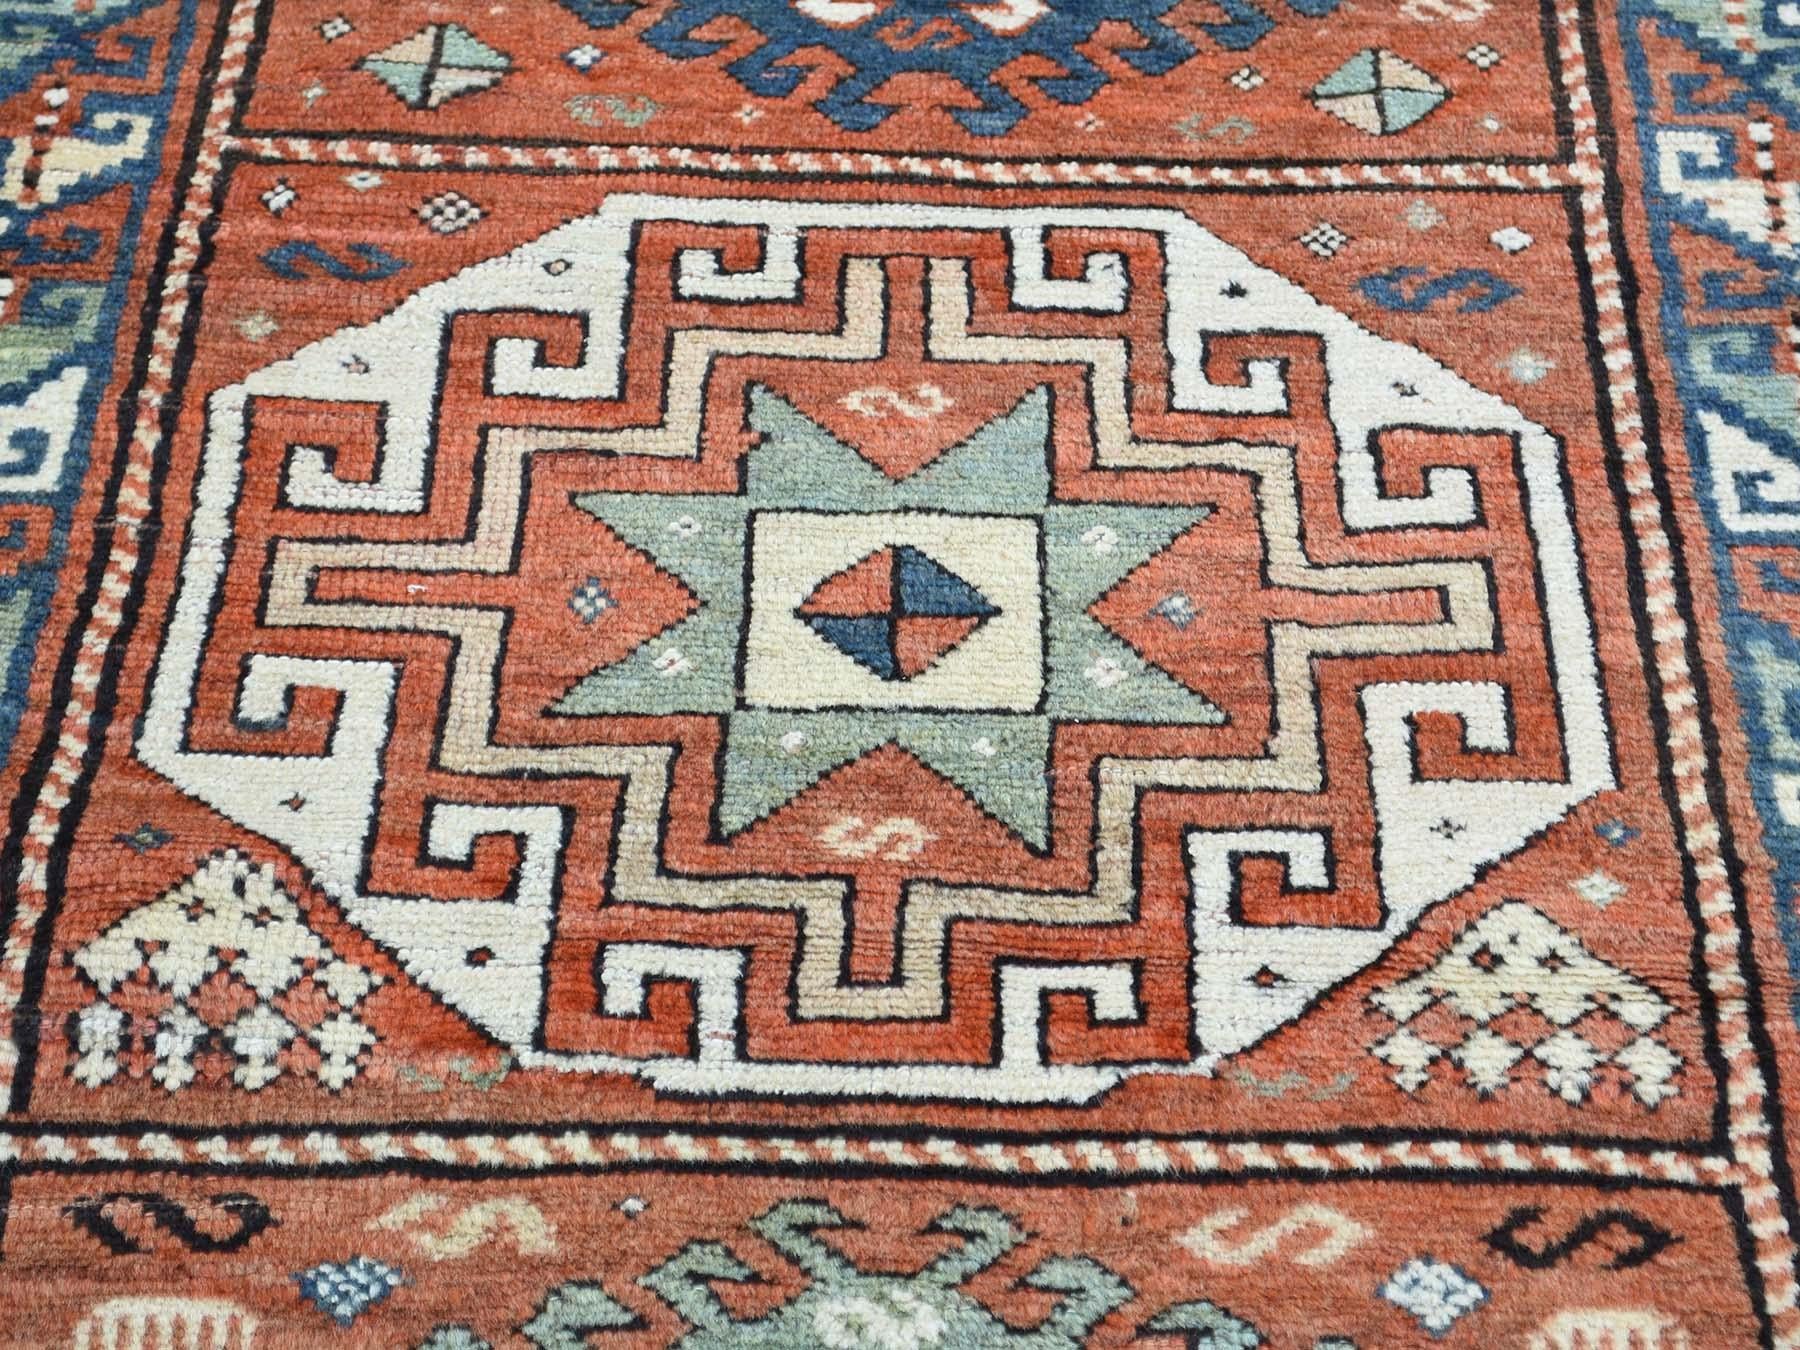 Late 19th Century 1890 Antique Caucasian Kazak Wide Runner Rug, Clean and Soft Pile